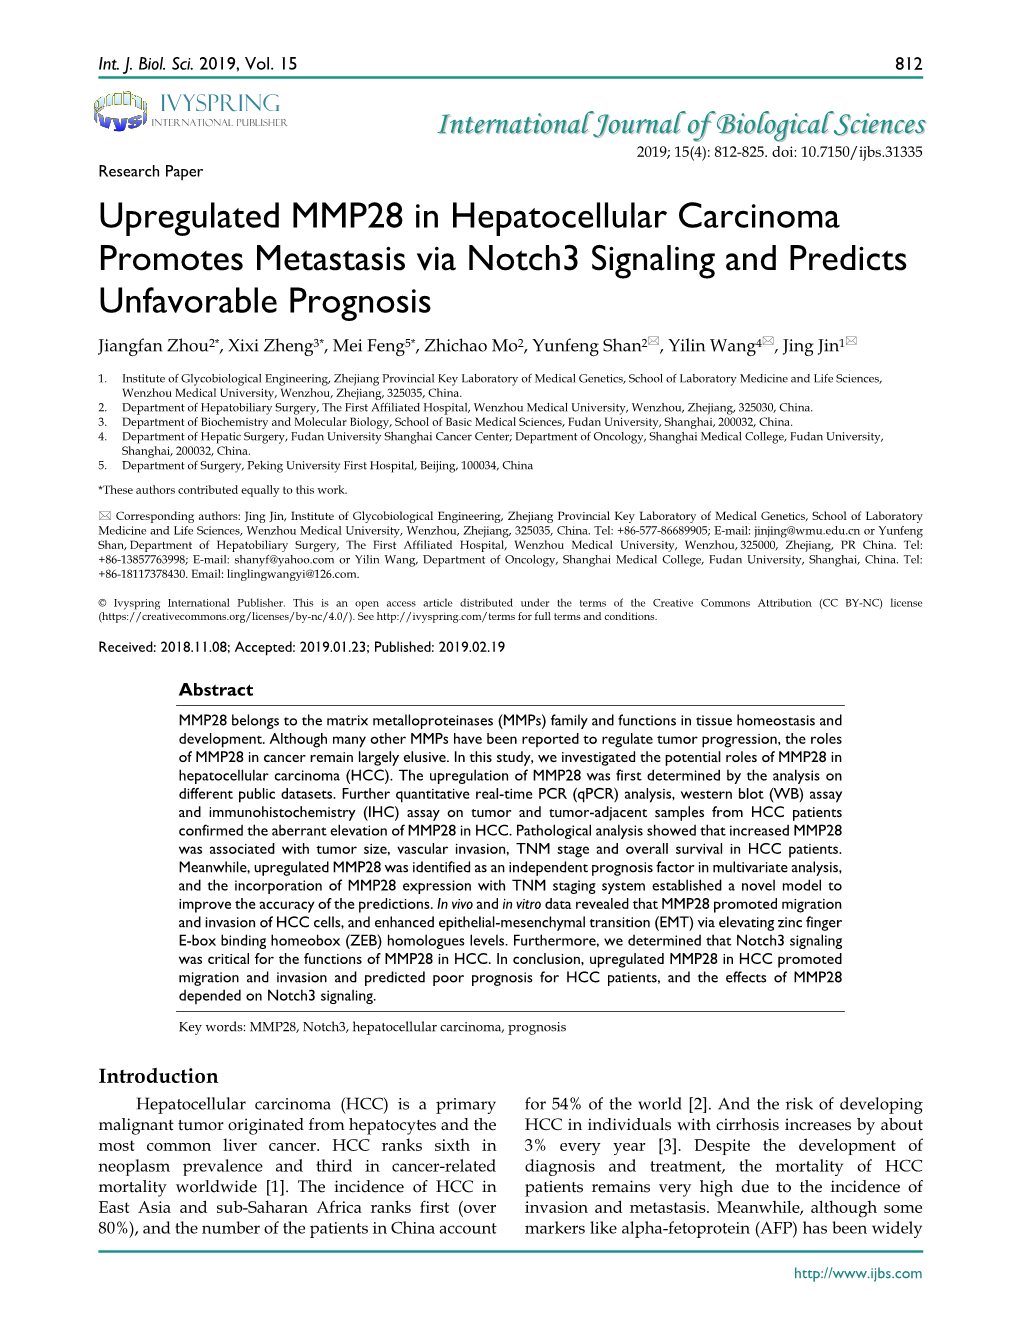 Upregulated MMP28 in Hepatocellular Carcinoma Promotes Metastasis Via Notch3 Signaling and Predicts Unfavorable Prognosis